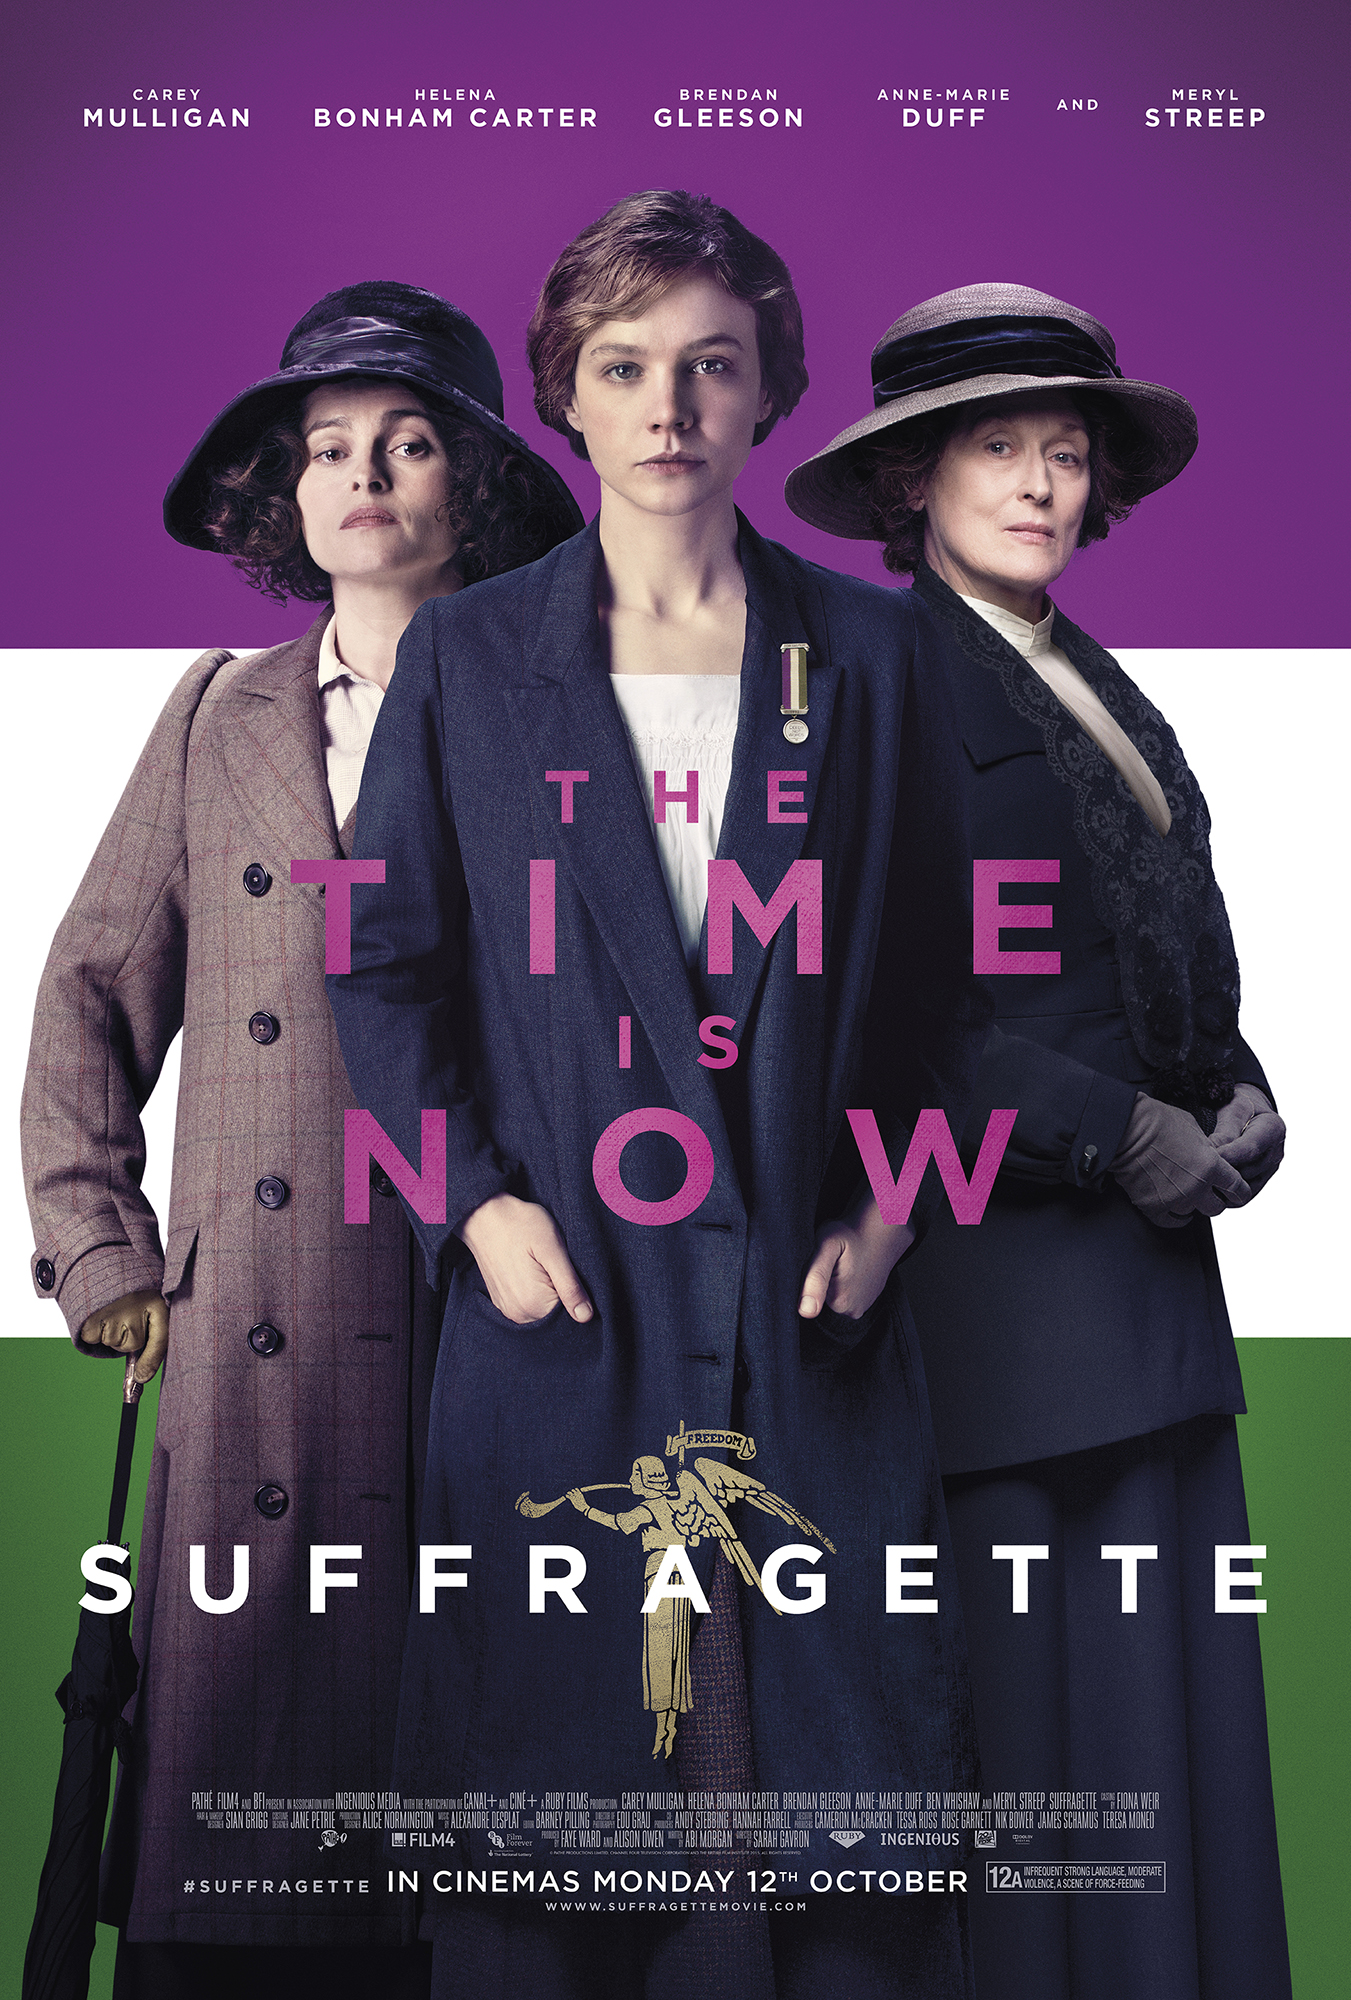 SUFFRAGETTEOfficialUKPoster